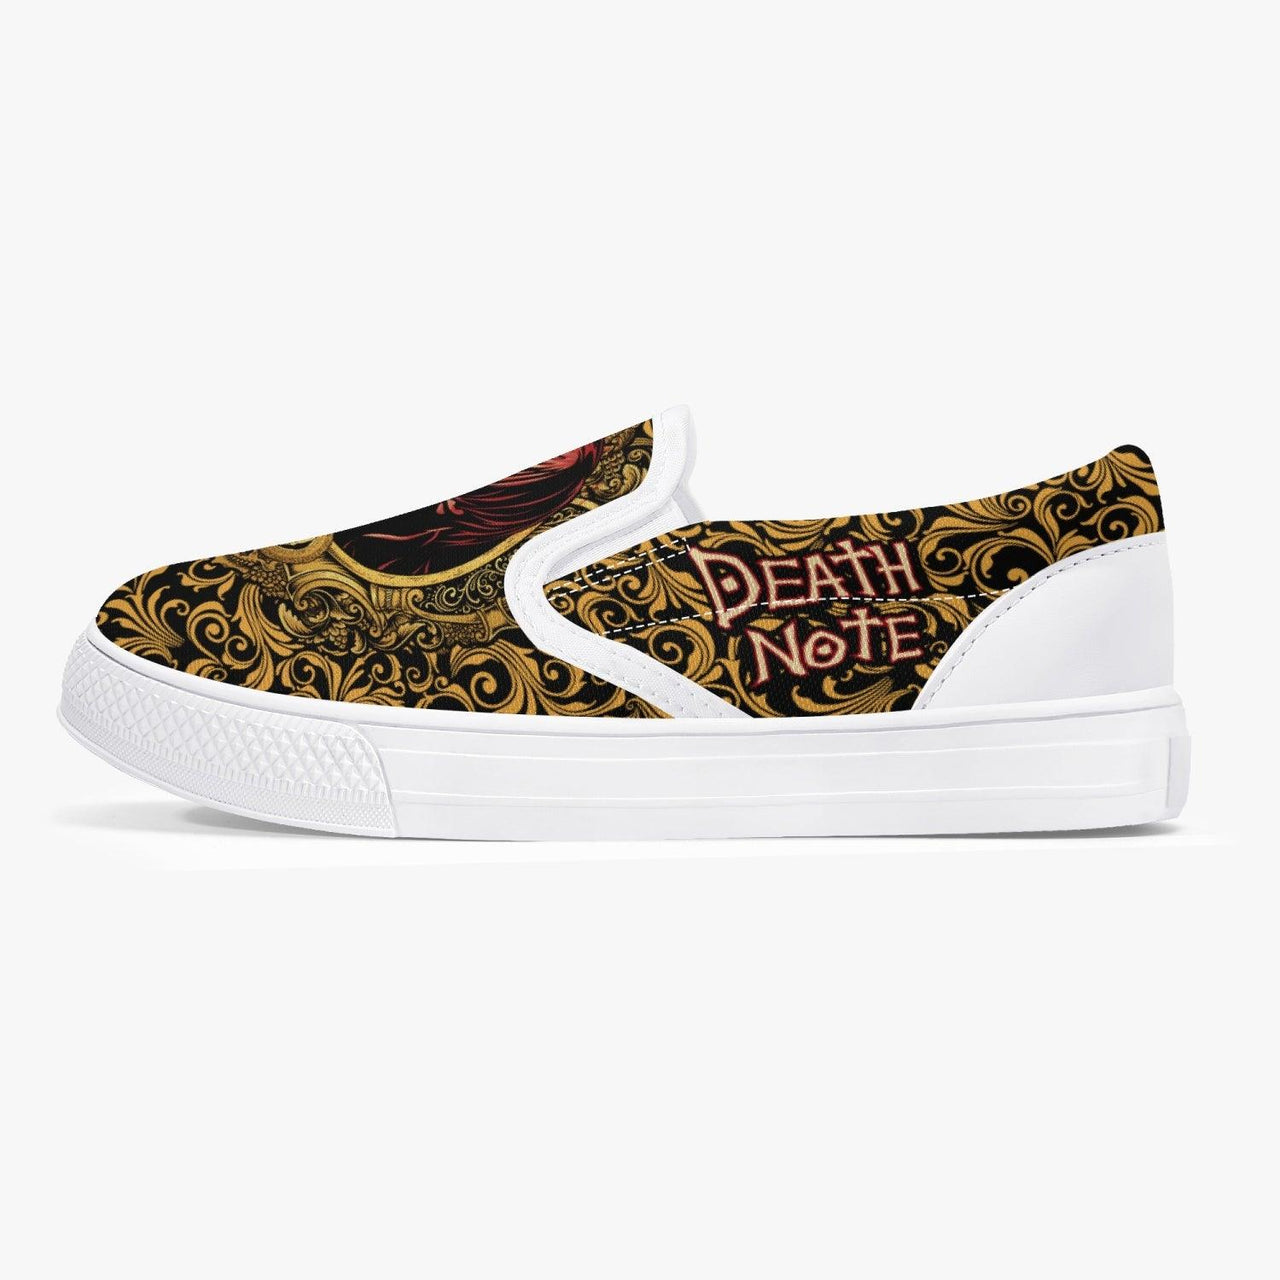 Death Note Light Yagami Kids Slip Ons Anime Shoes _ Death Note _ Ayuko